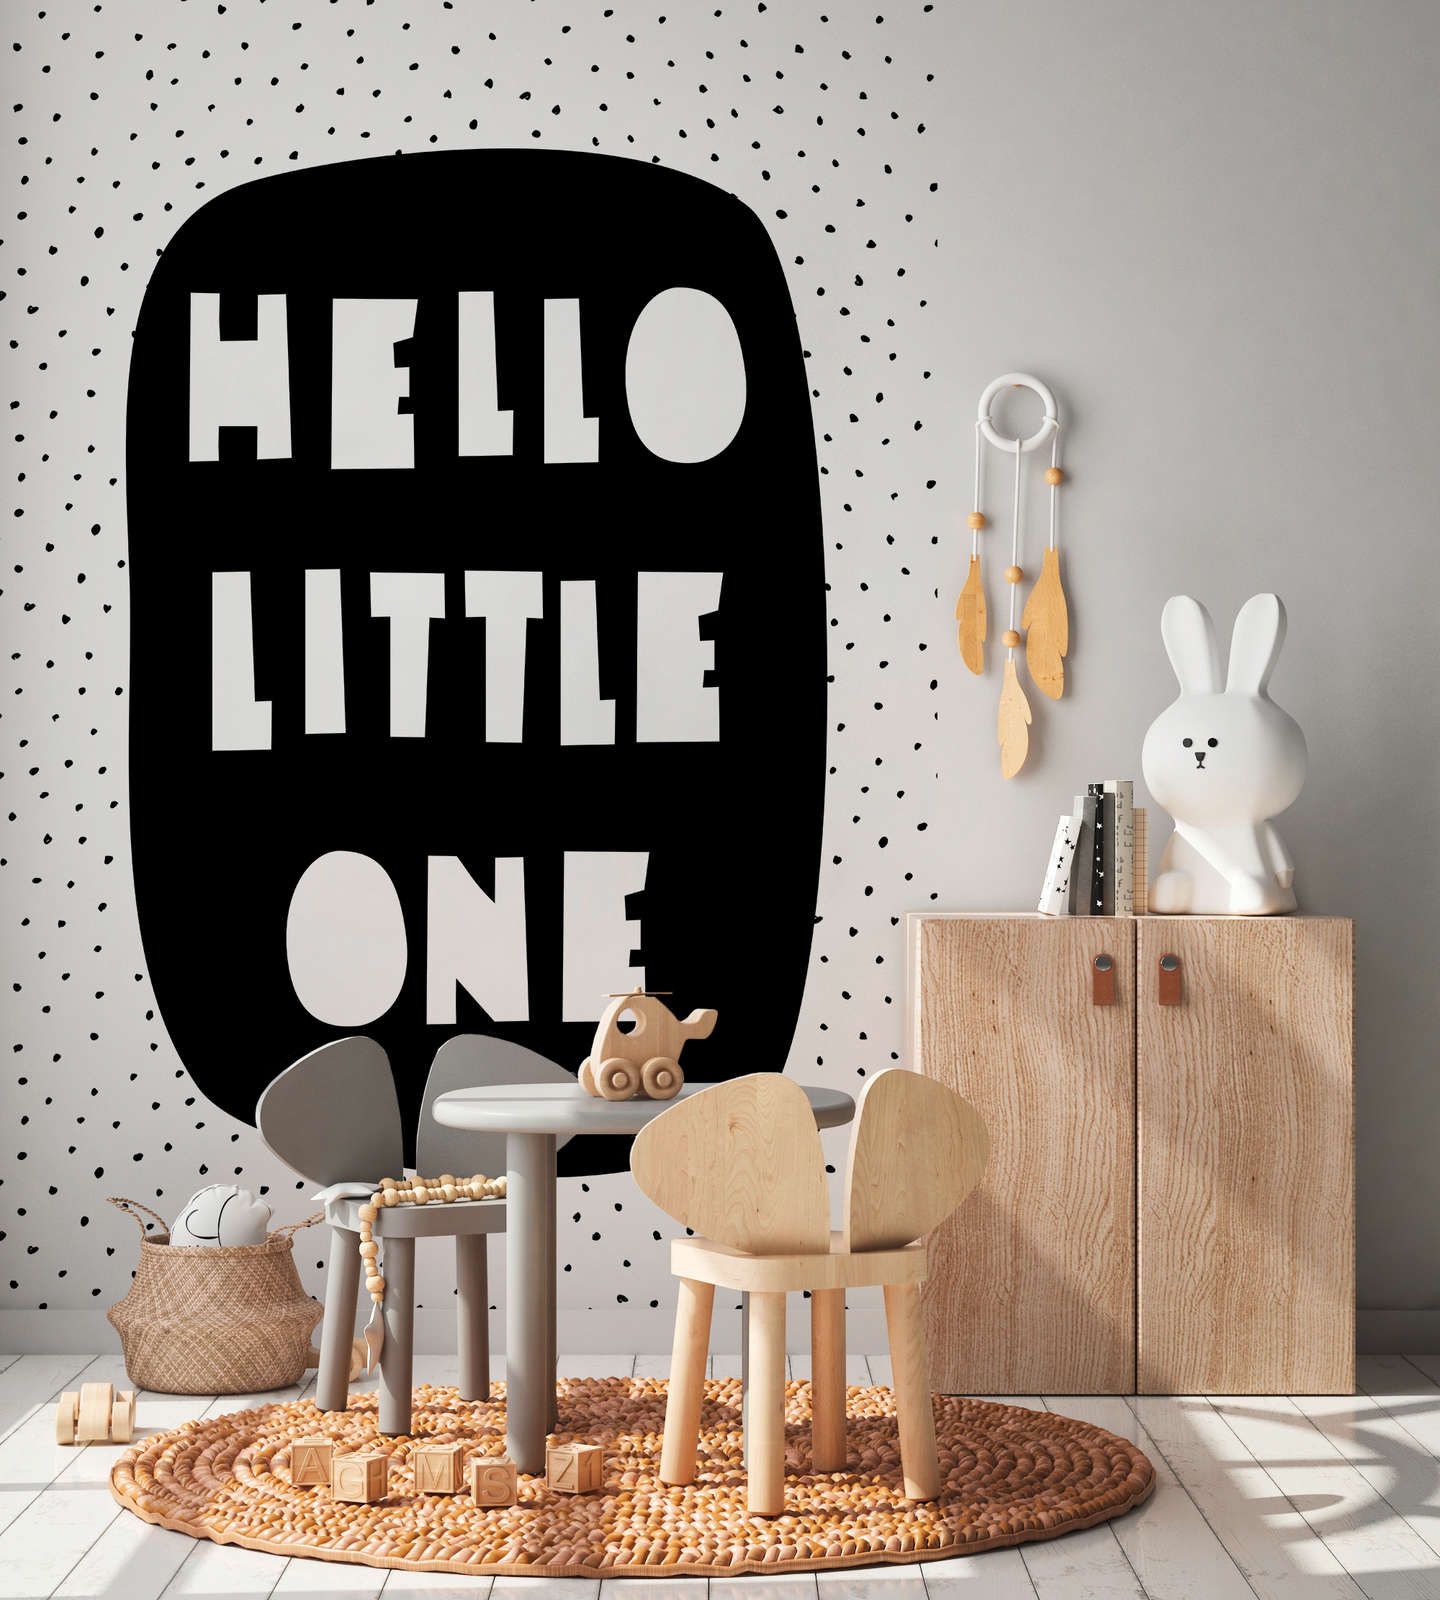             Photo wallpaper for the children's room with "Hello Little One" lettering - textured non-woven
        